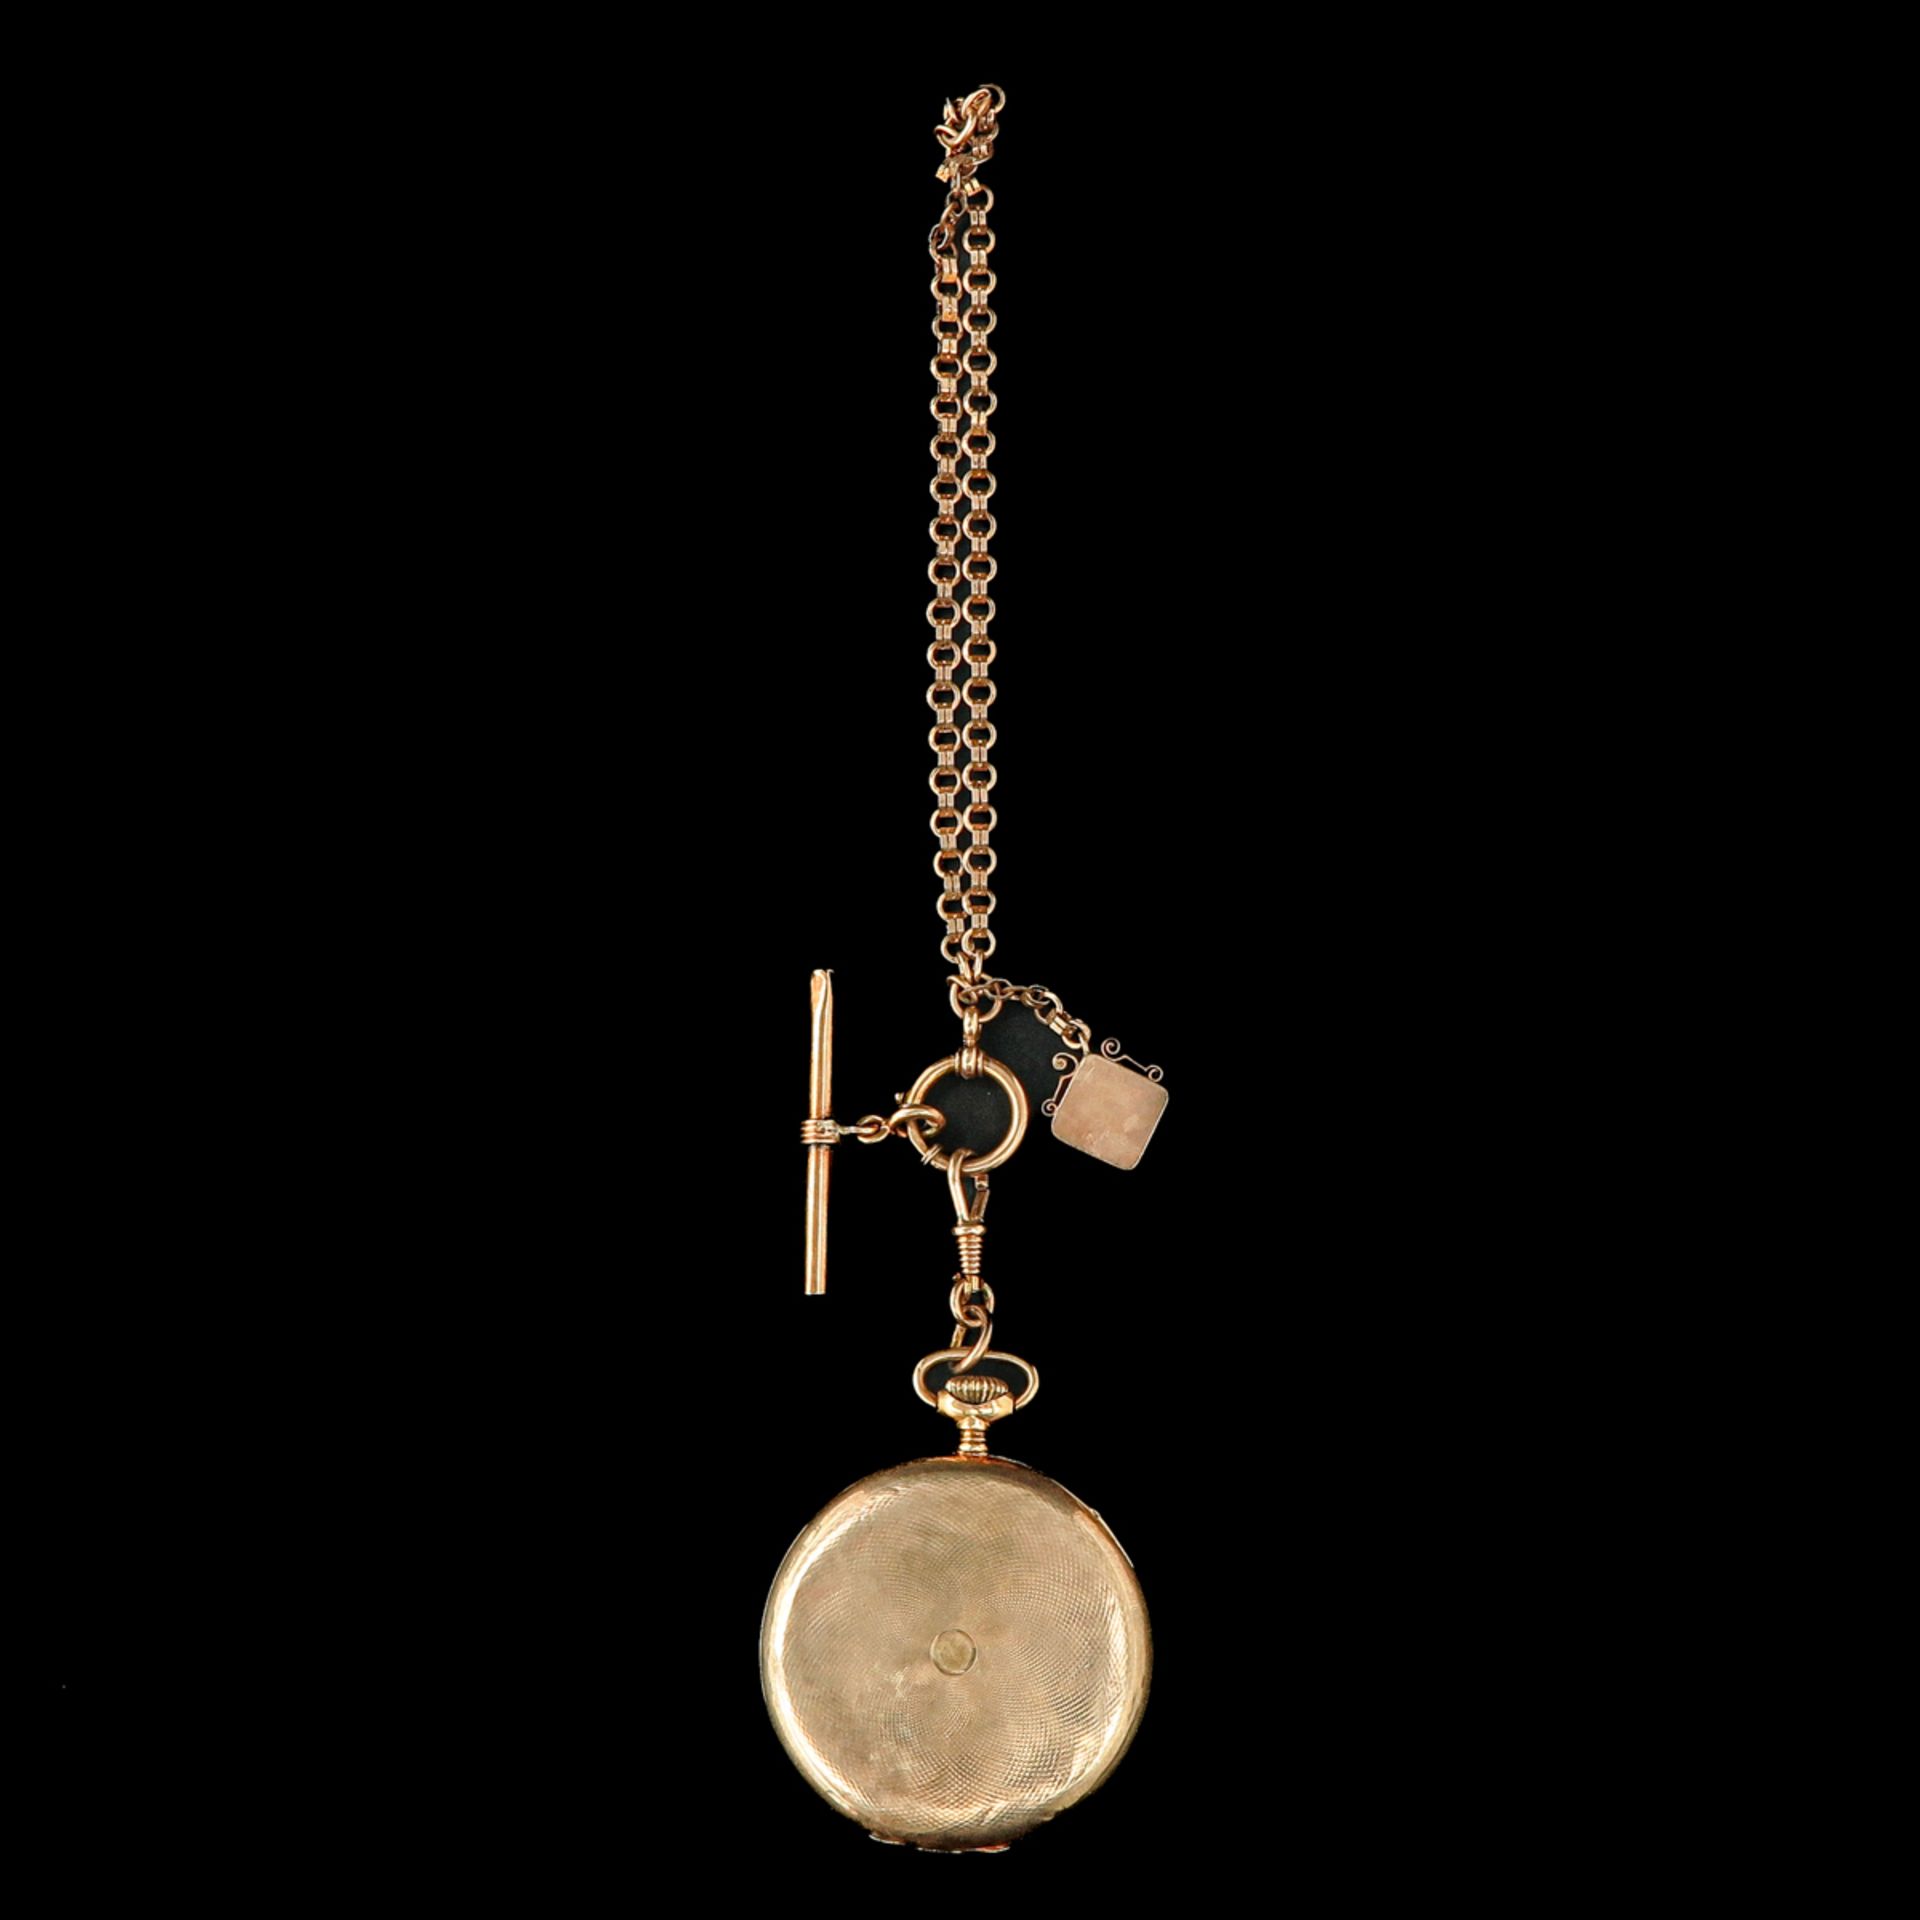 A Pocket Watch Holder with Pocket Watch - Image 3 of 7